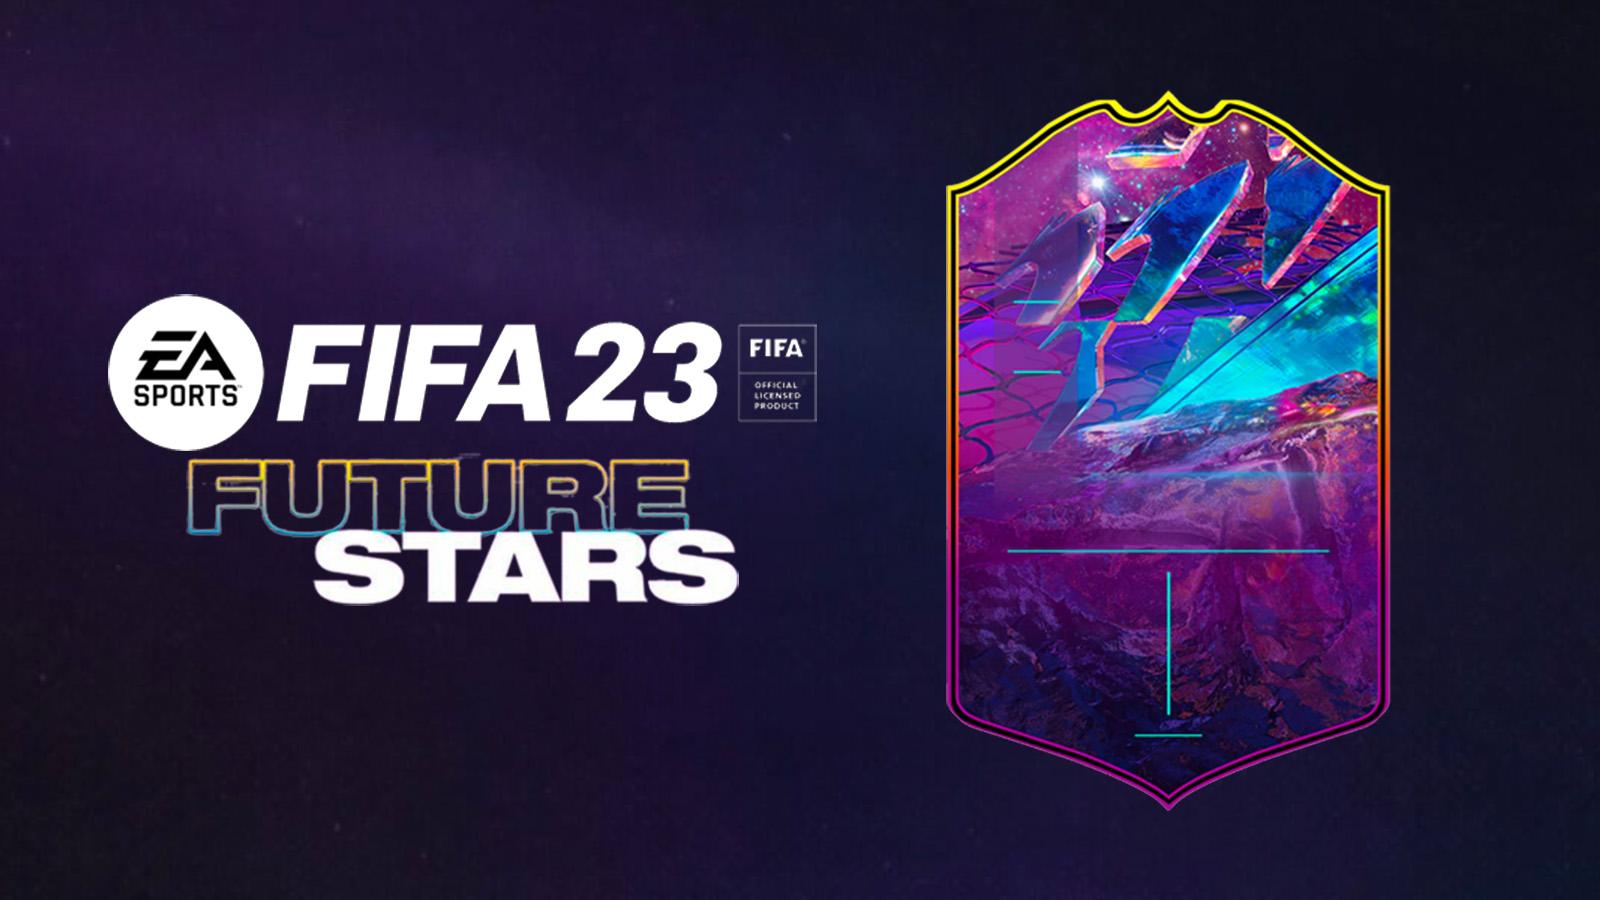 FIFA 23 Prime Gaming Pack 4 IS OUT NOW! 😍😍 the NEW FIFA 23 Twitch Pr